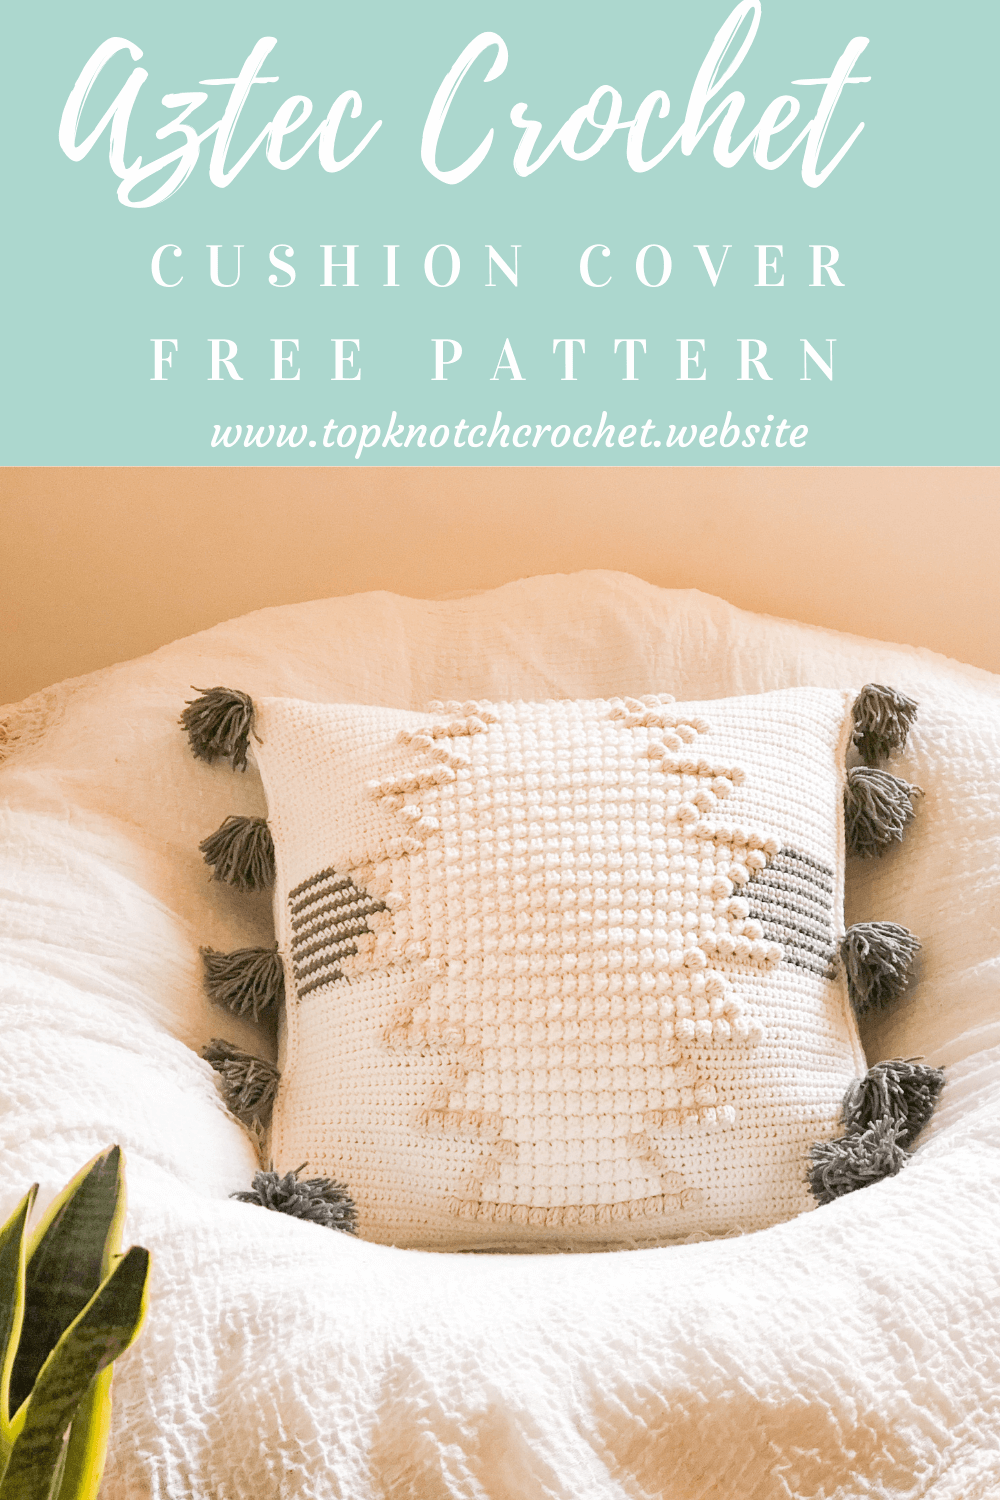 You are currently viewing Aztec Crochet Cushion Cover Pattern